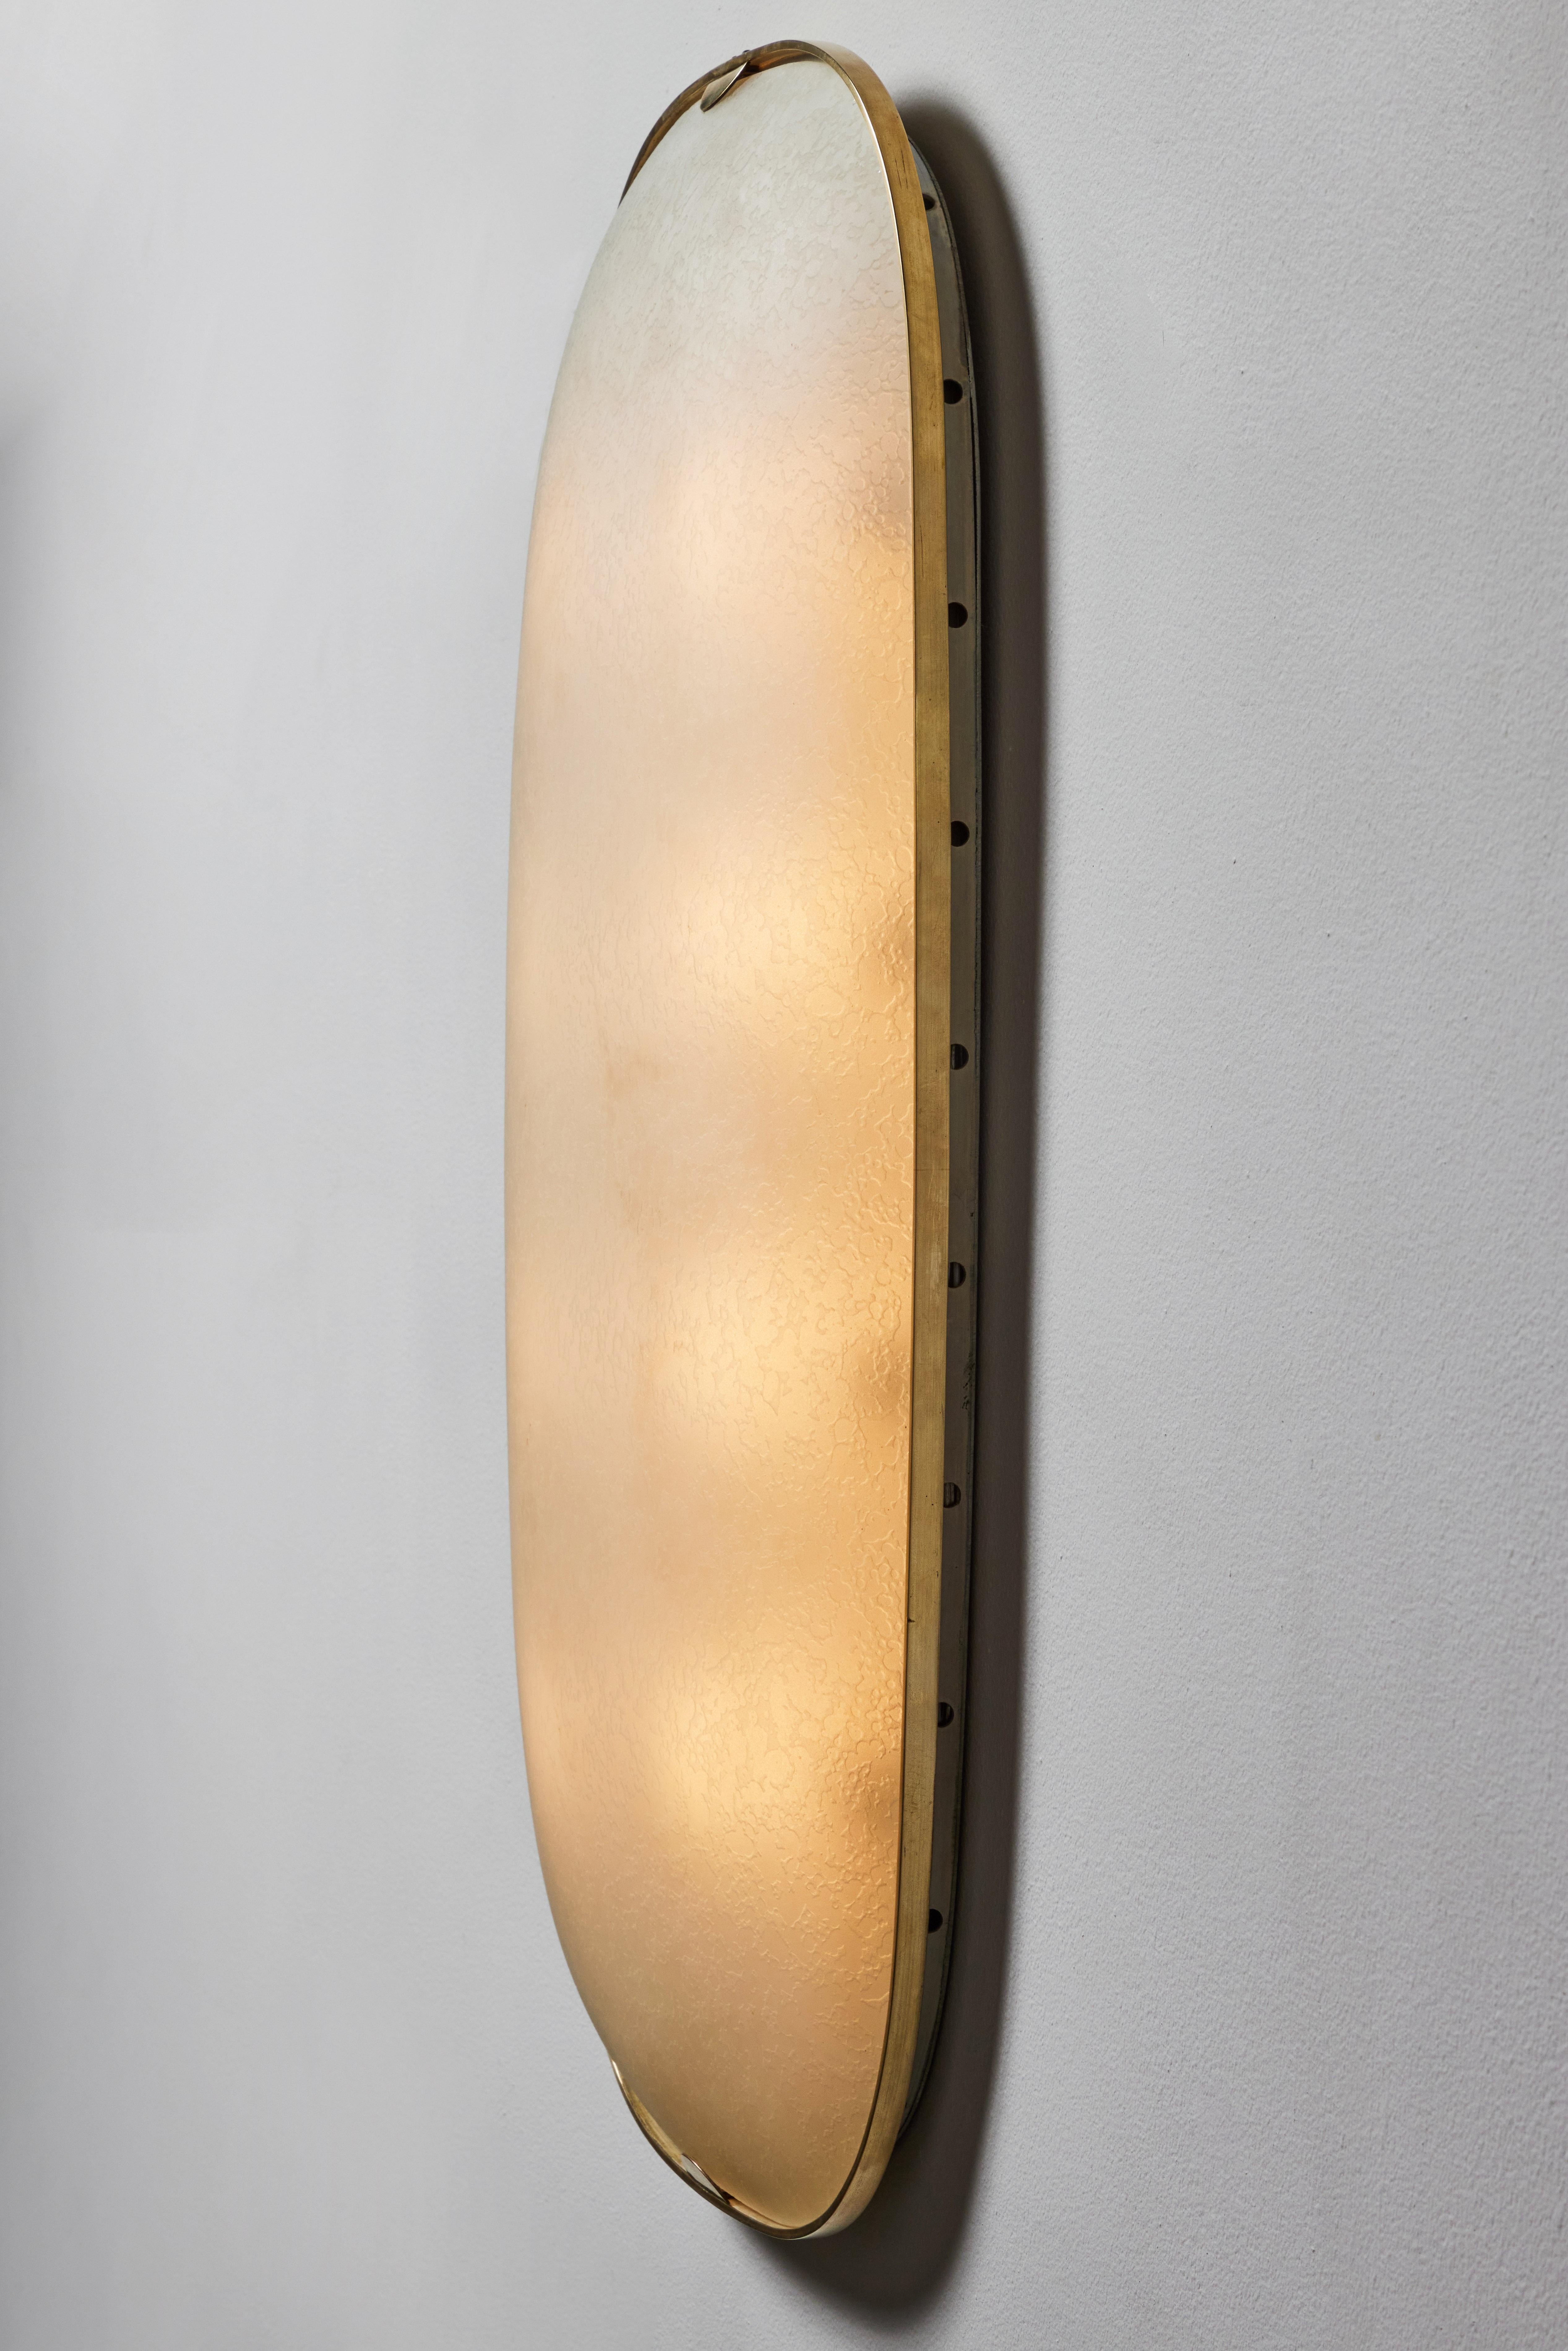 Painted Large Flush Mount Wall /Ceiling Light by Fontana Arte